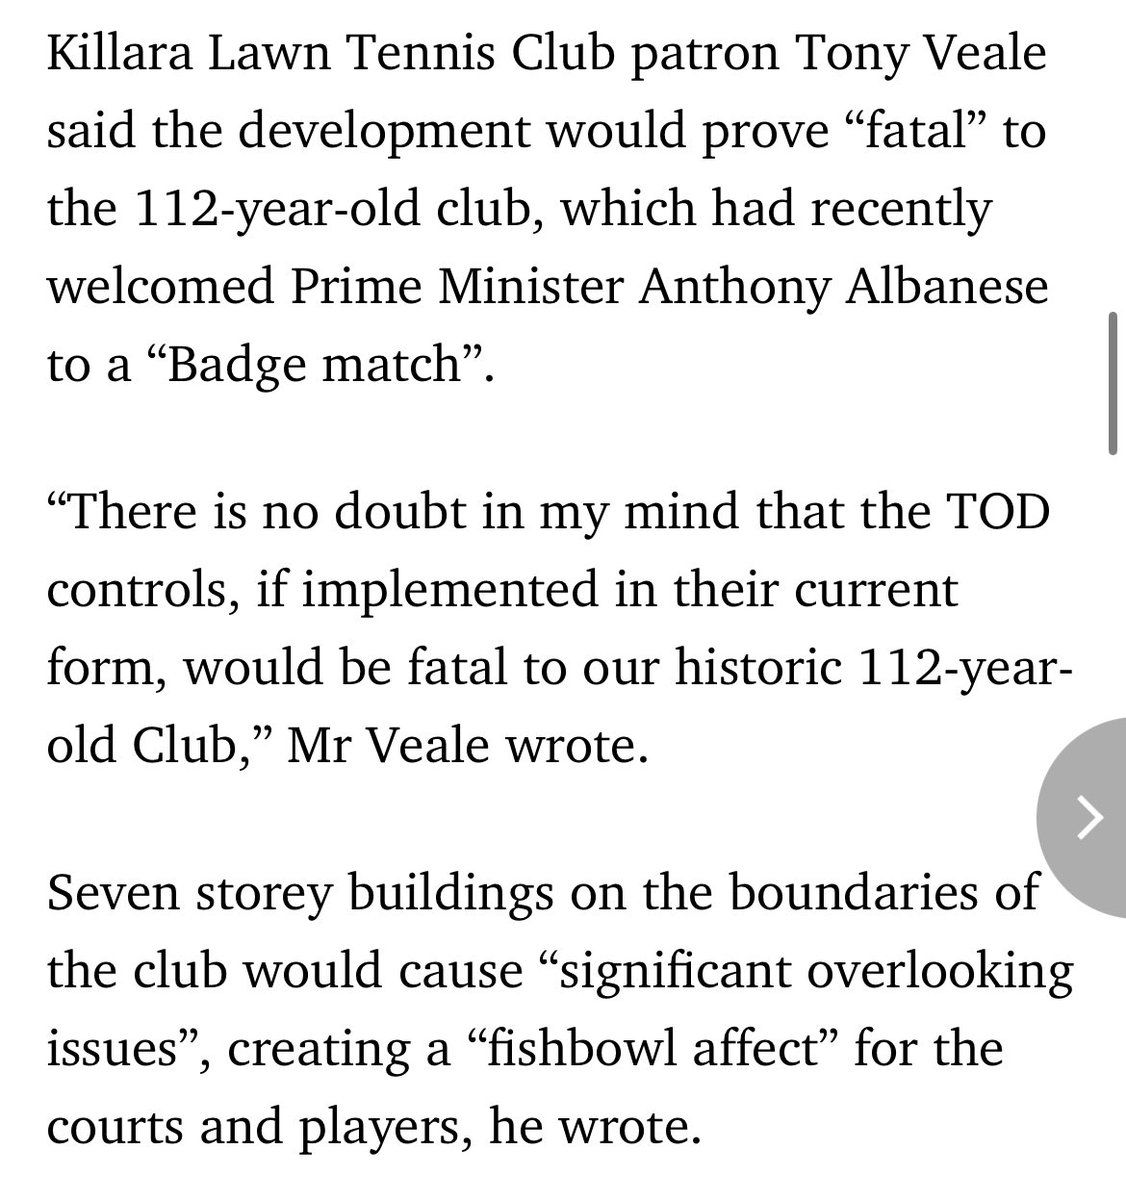 “These apartments will overlook our tennis courts” has to be one of the least sympathetic arguments against them dailytelegraph.com.au/news/nsw/resid…